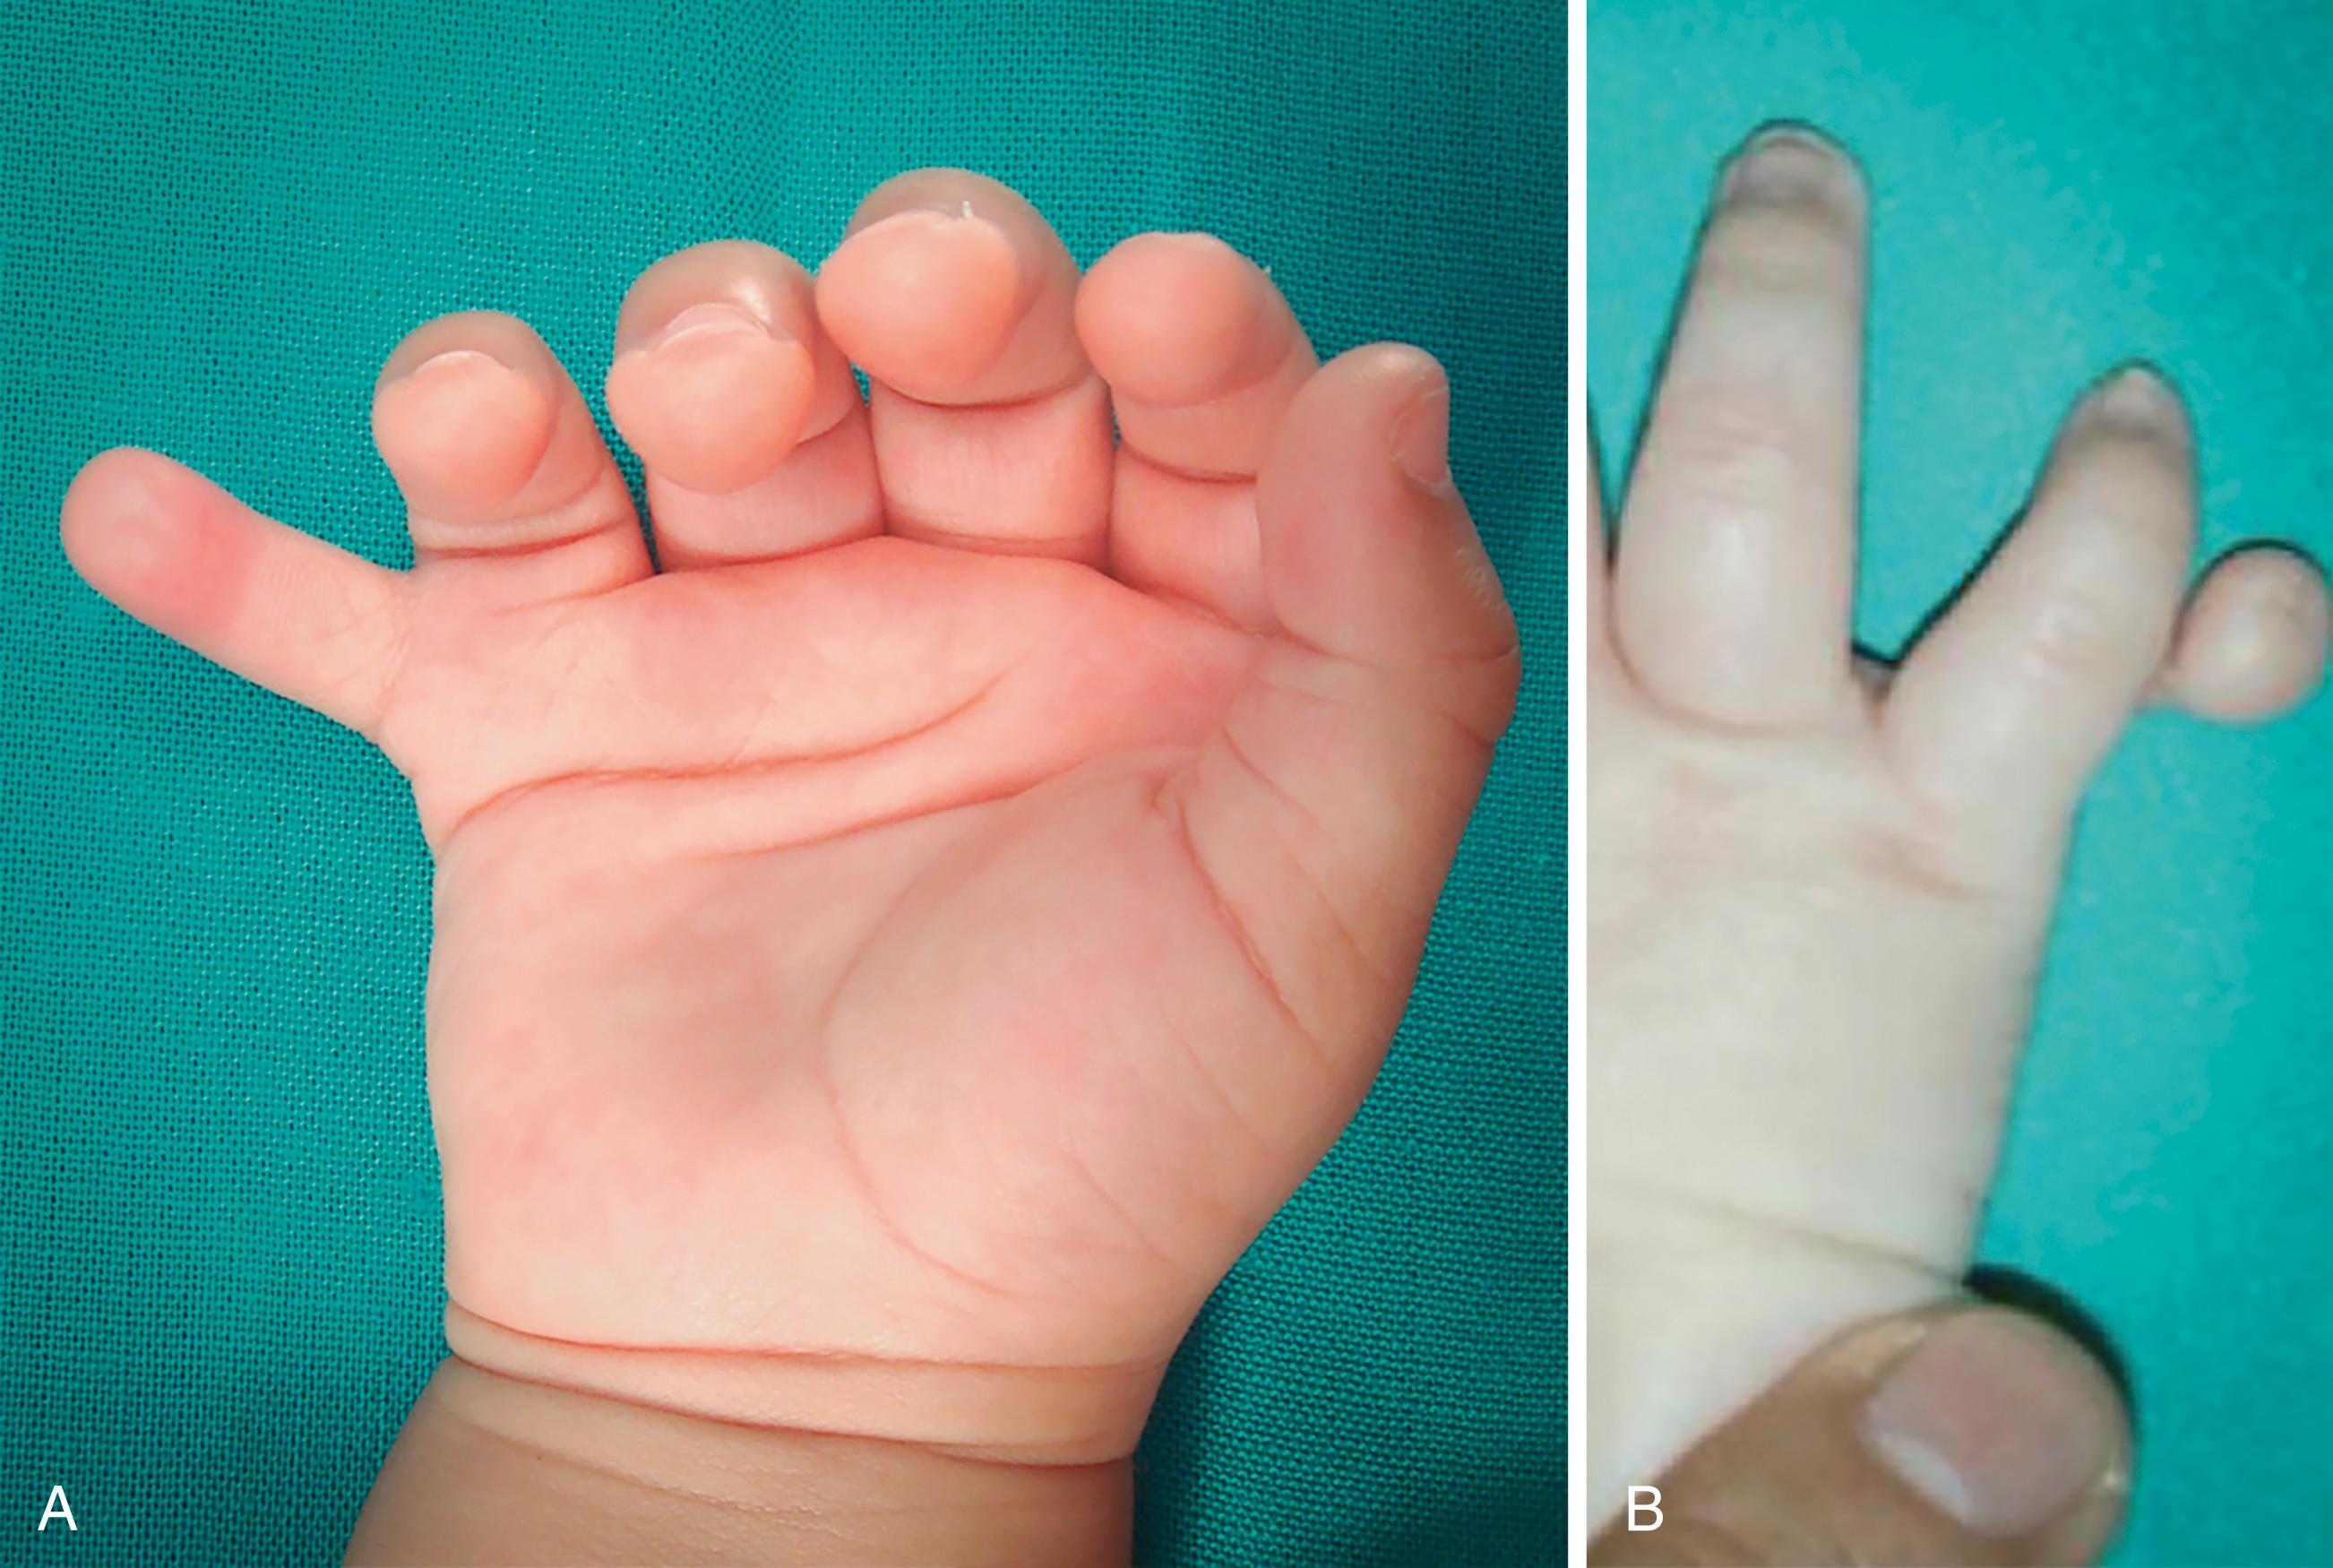 Fig. 36.30, A, Type A is a fully developed postaxial polydactyly. In white children it might be part of a syndrome and warrants a systemic evaluation. Reconstruction is similar to thumb duplication. MCP collateral ligament and intrinsic muscle reinsertion is needed to avoid future complications. B, Type B postaxial polydactyly.